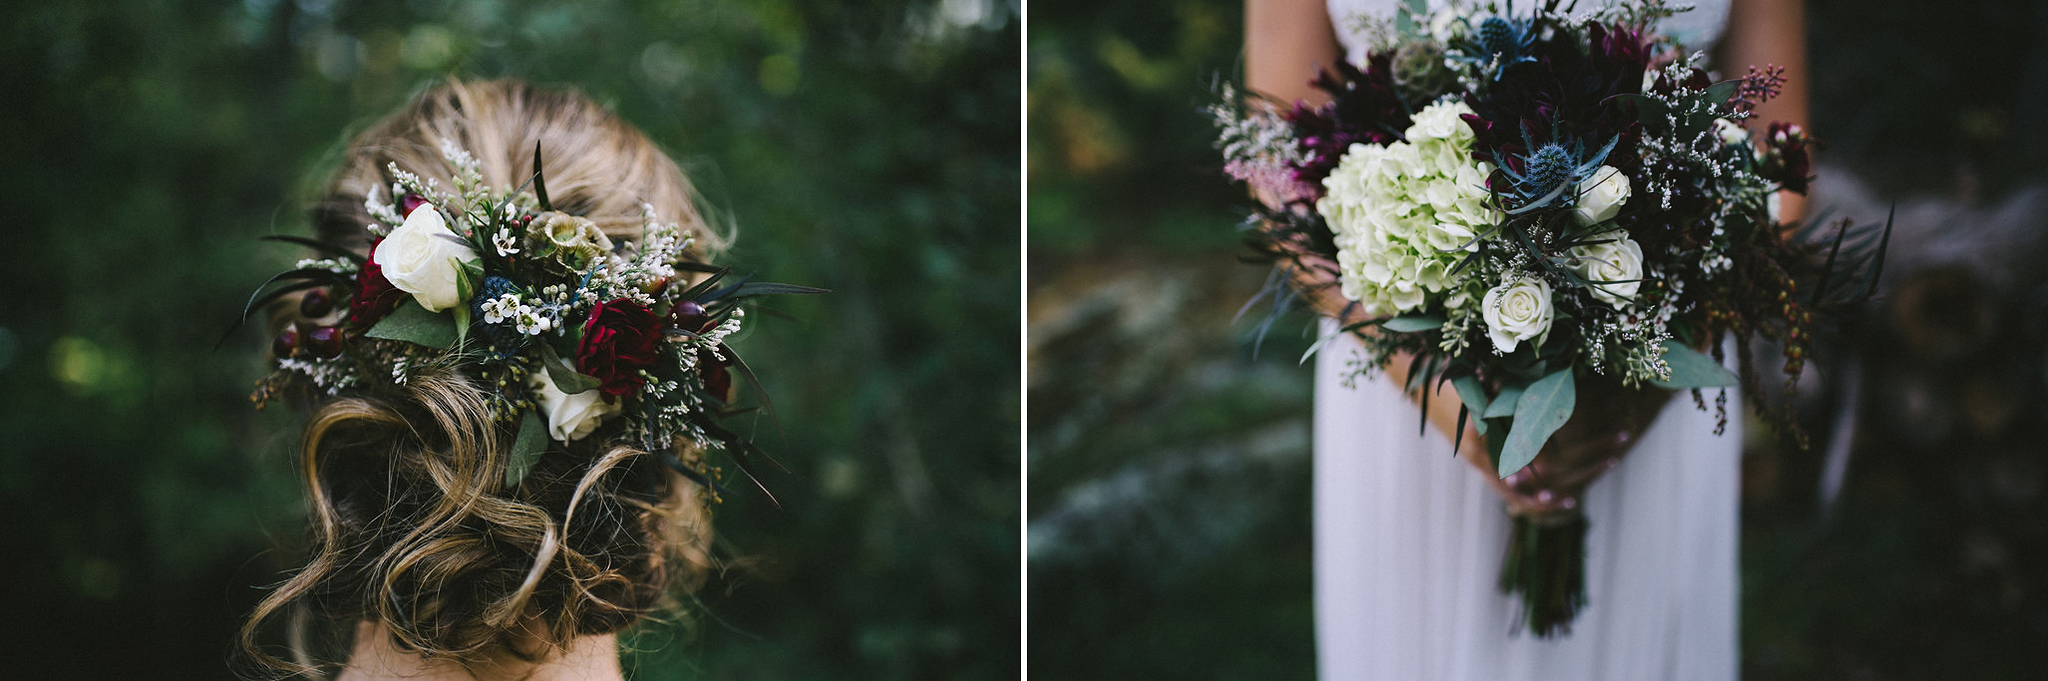 Burgundy wedding bouquet and hair comb